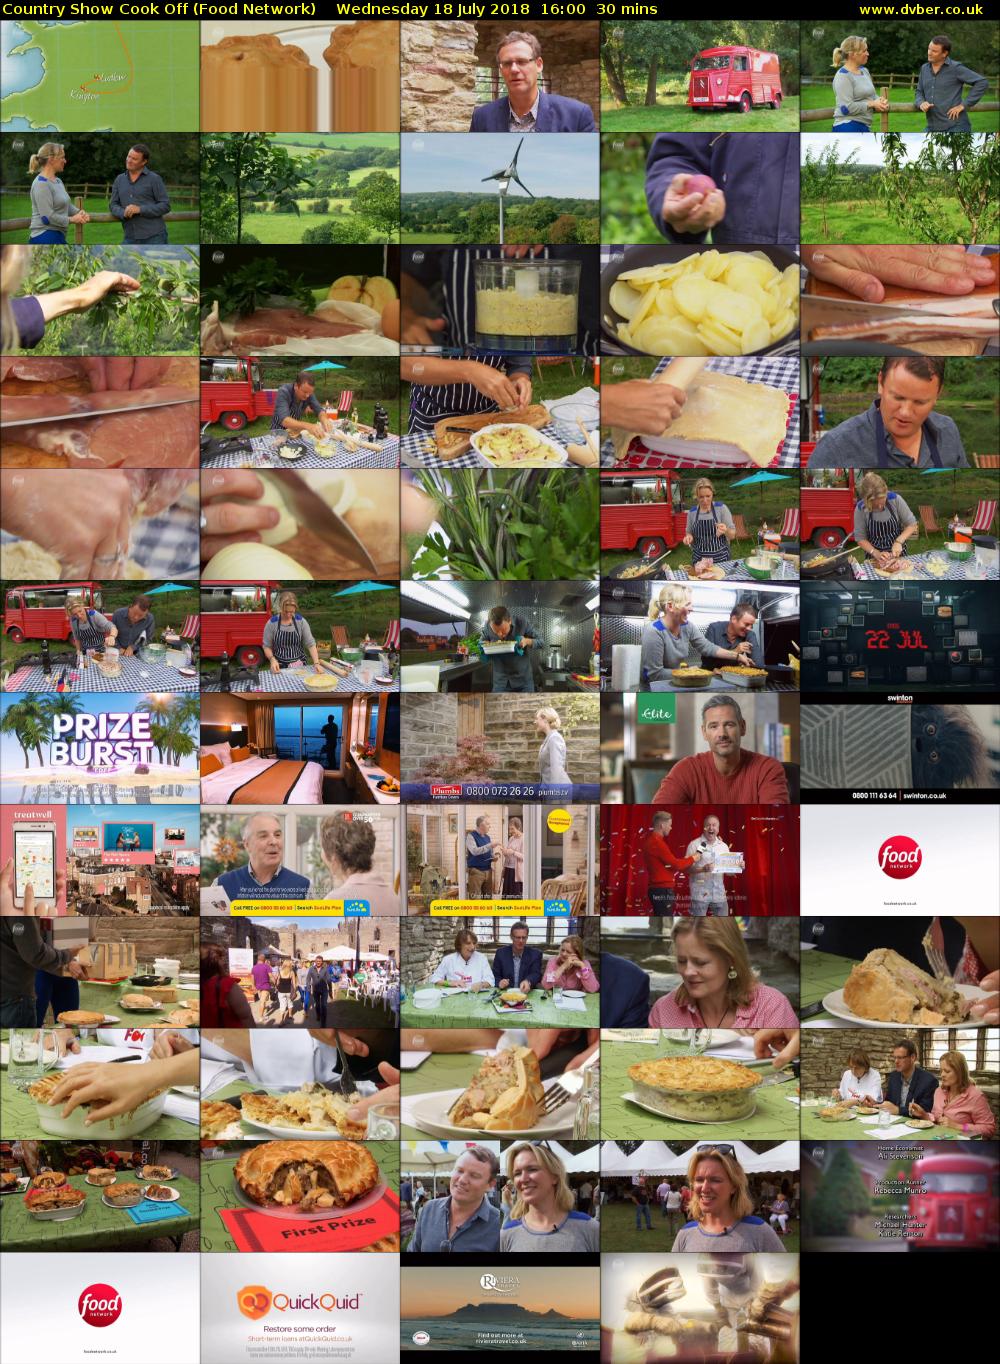 Country Show Cook Off (Food Network) Wednesday 18 July 2018 16:00 - 16:30